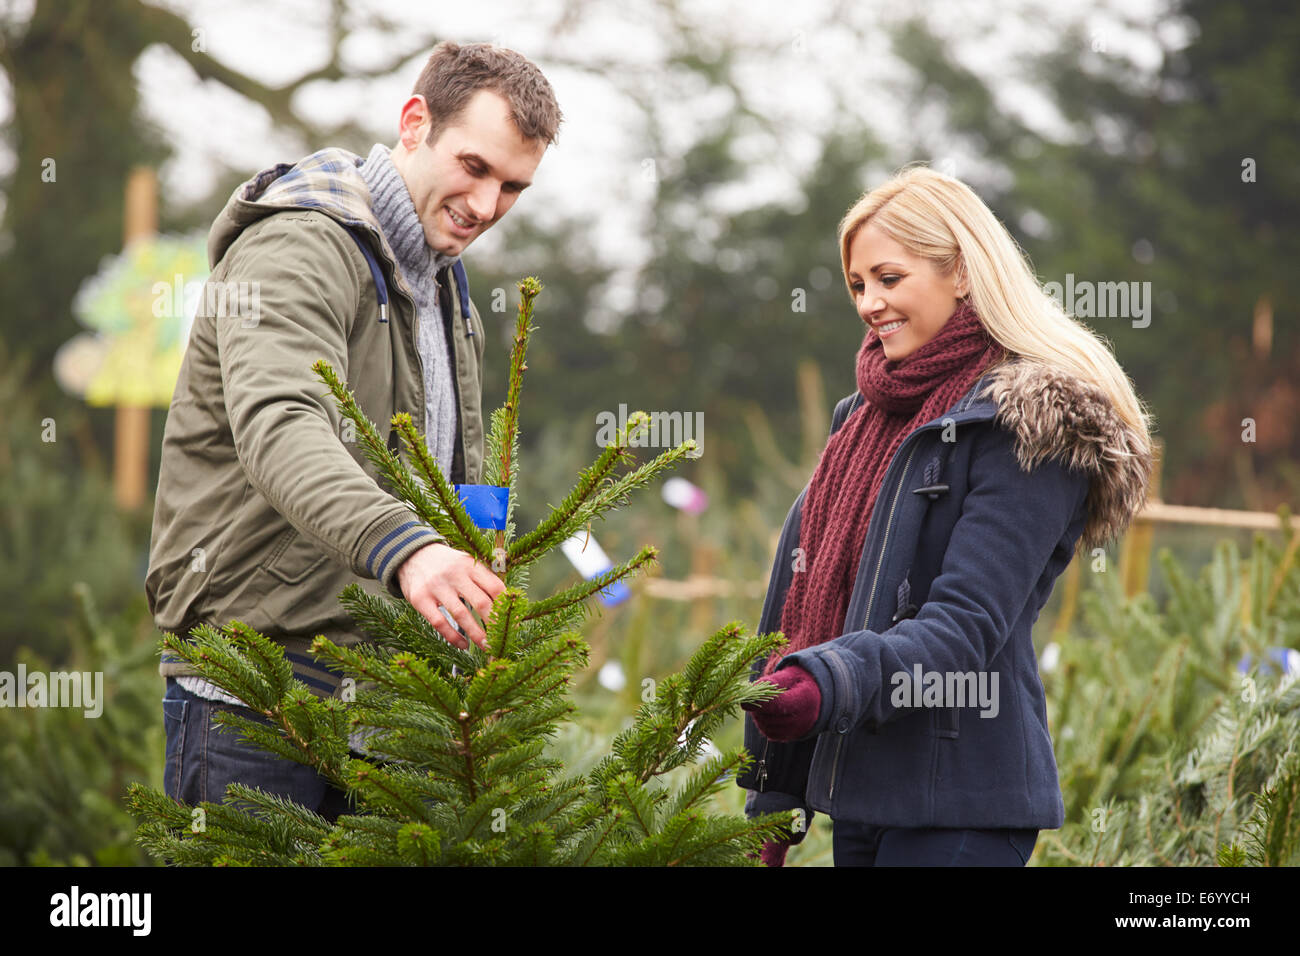 Outdoor Couple Choosing Christmas Tree Together Stock Photo